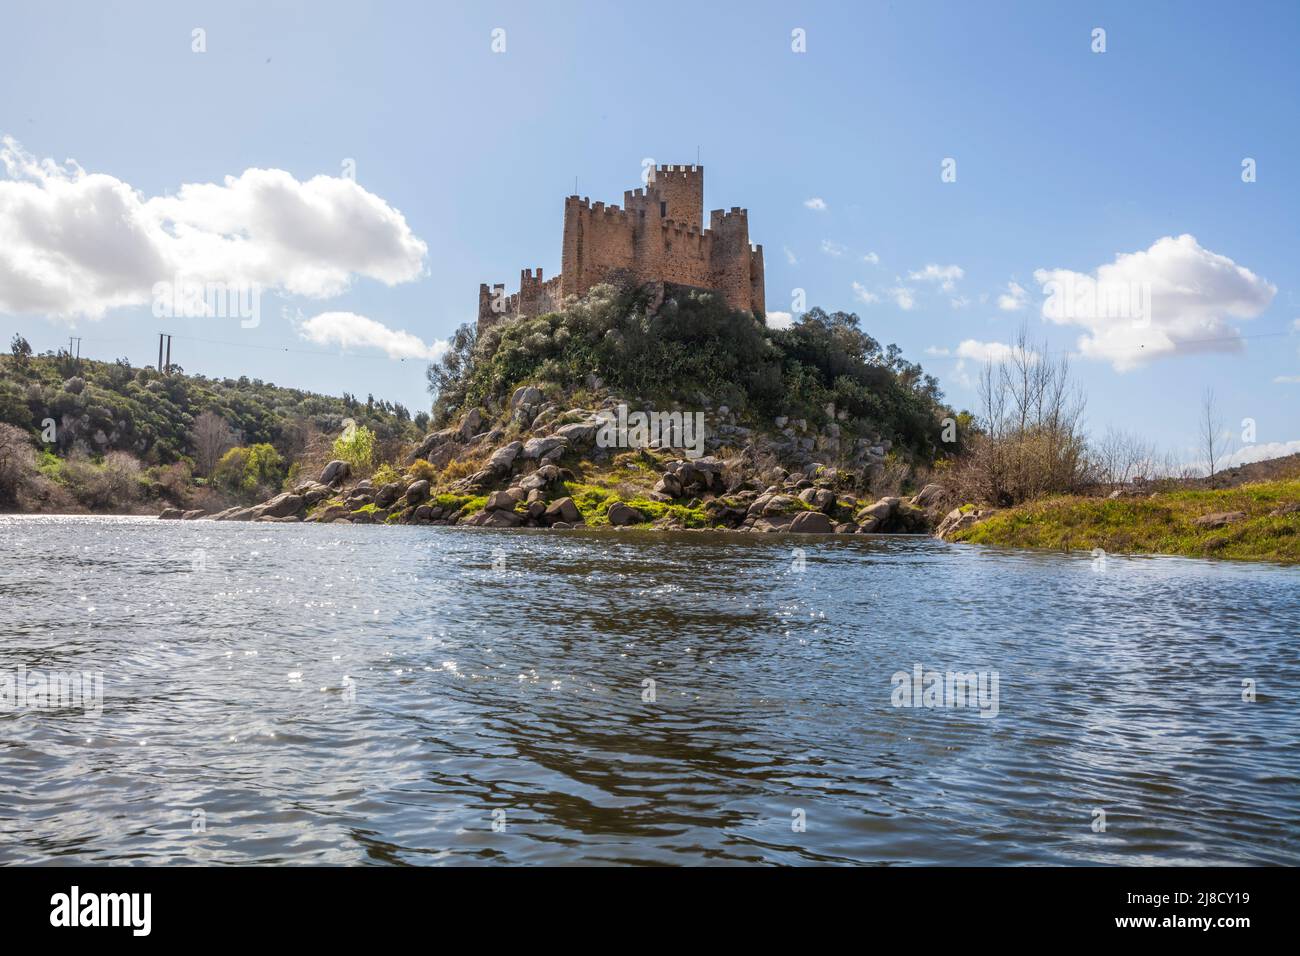 View from the banks of the Tajo River towards Almourol Castle, situated in the middle of an island. Center of Portugal Stock Photo